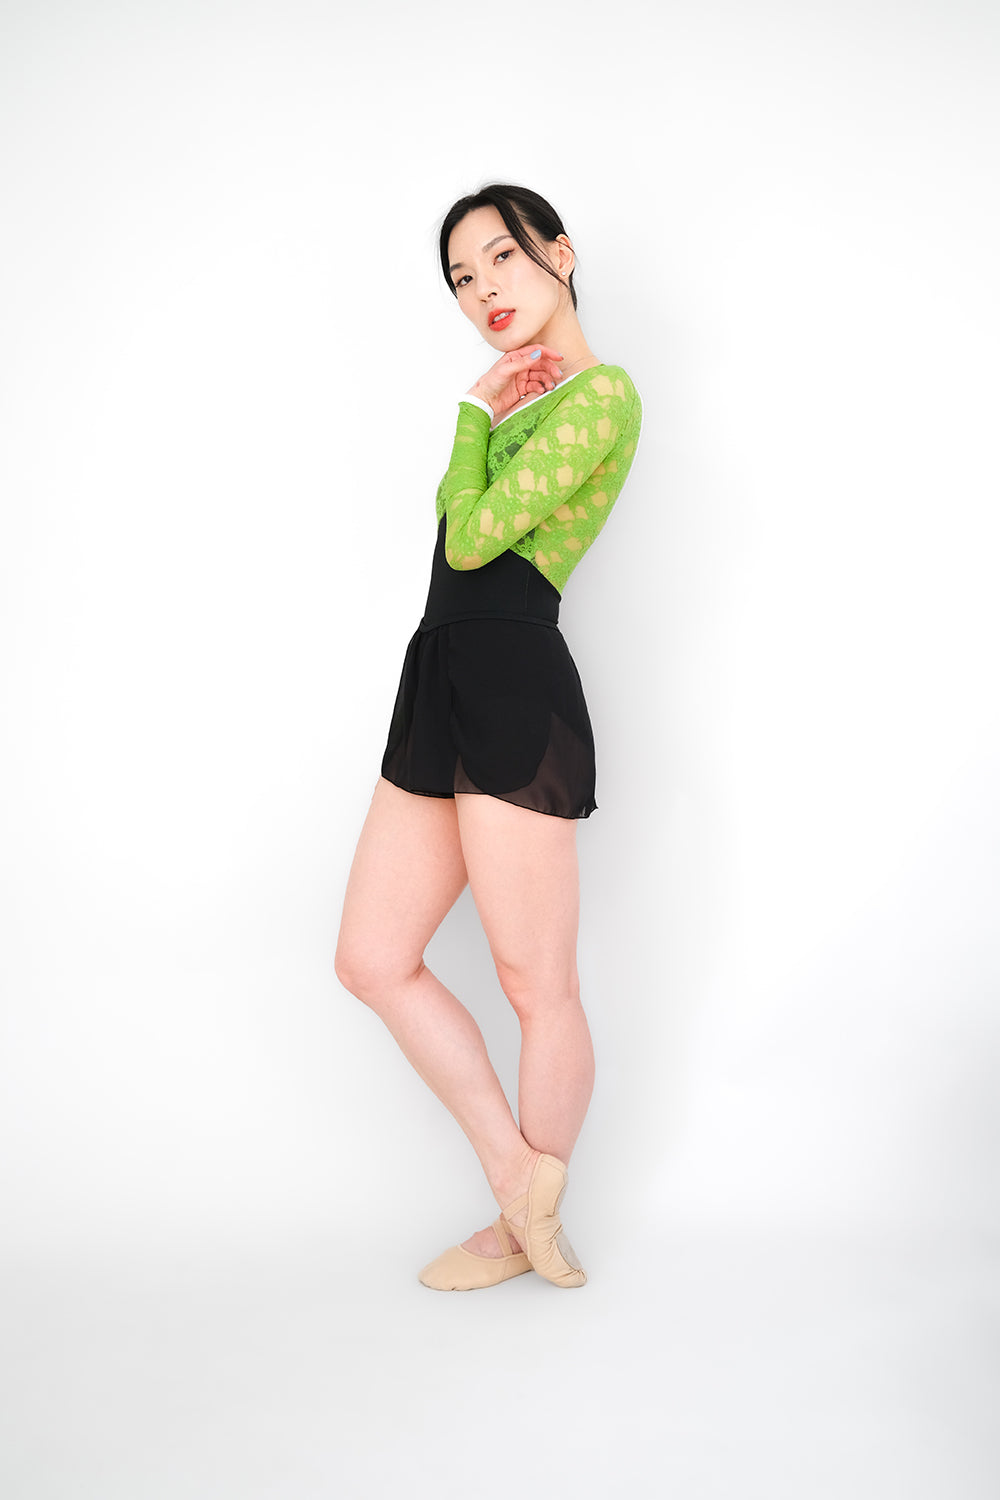 [PS] Audrey Duo Sleeve Ballet Leotard - Black/Green Lace